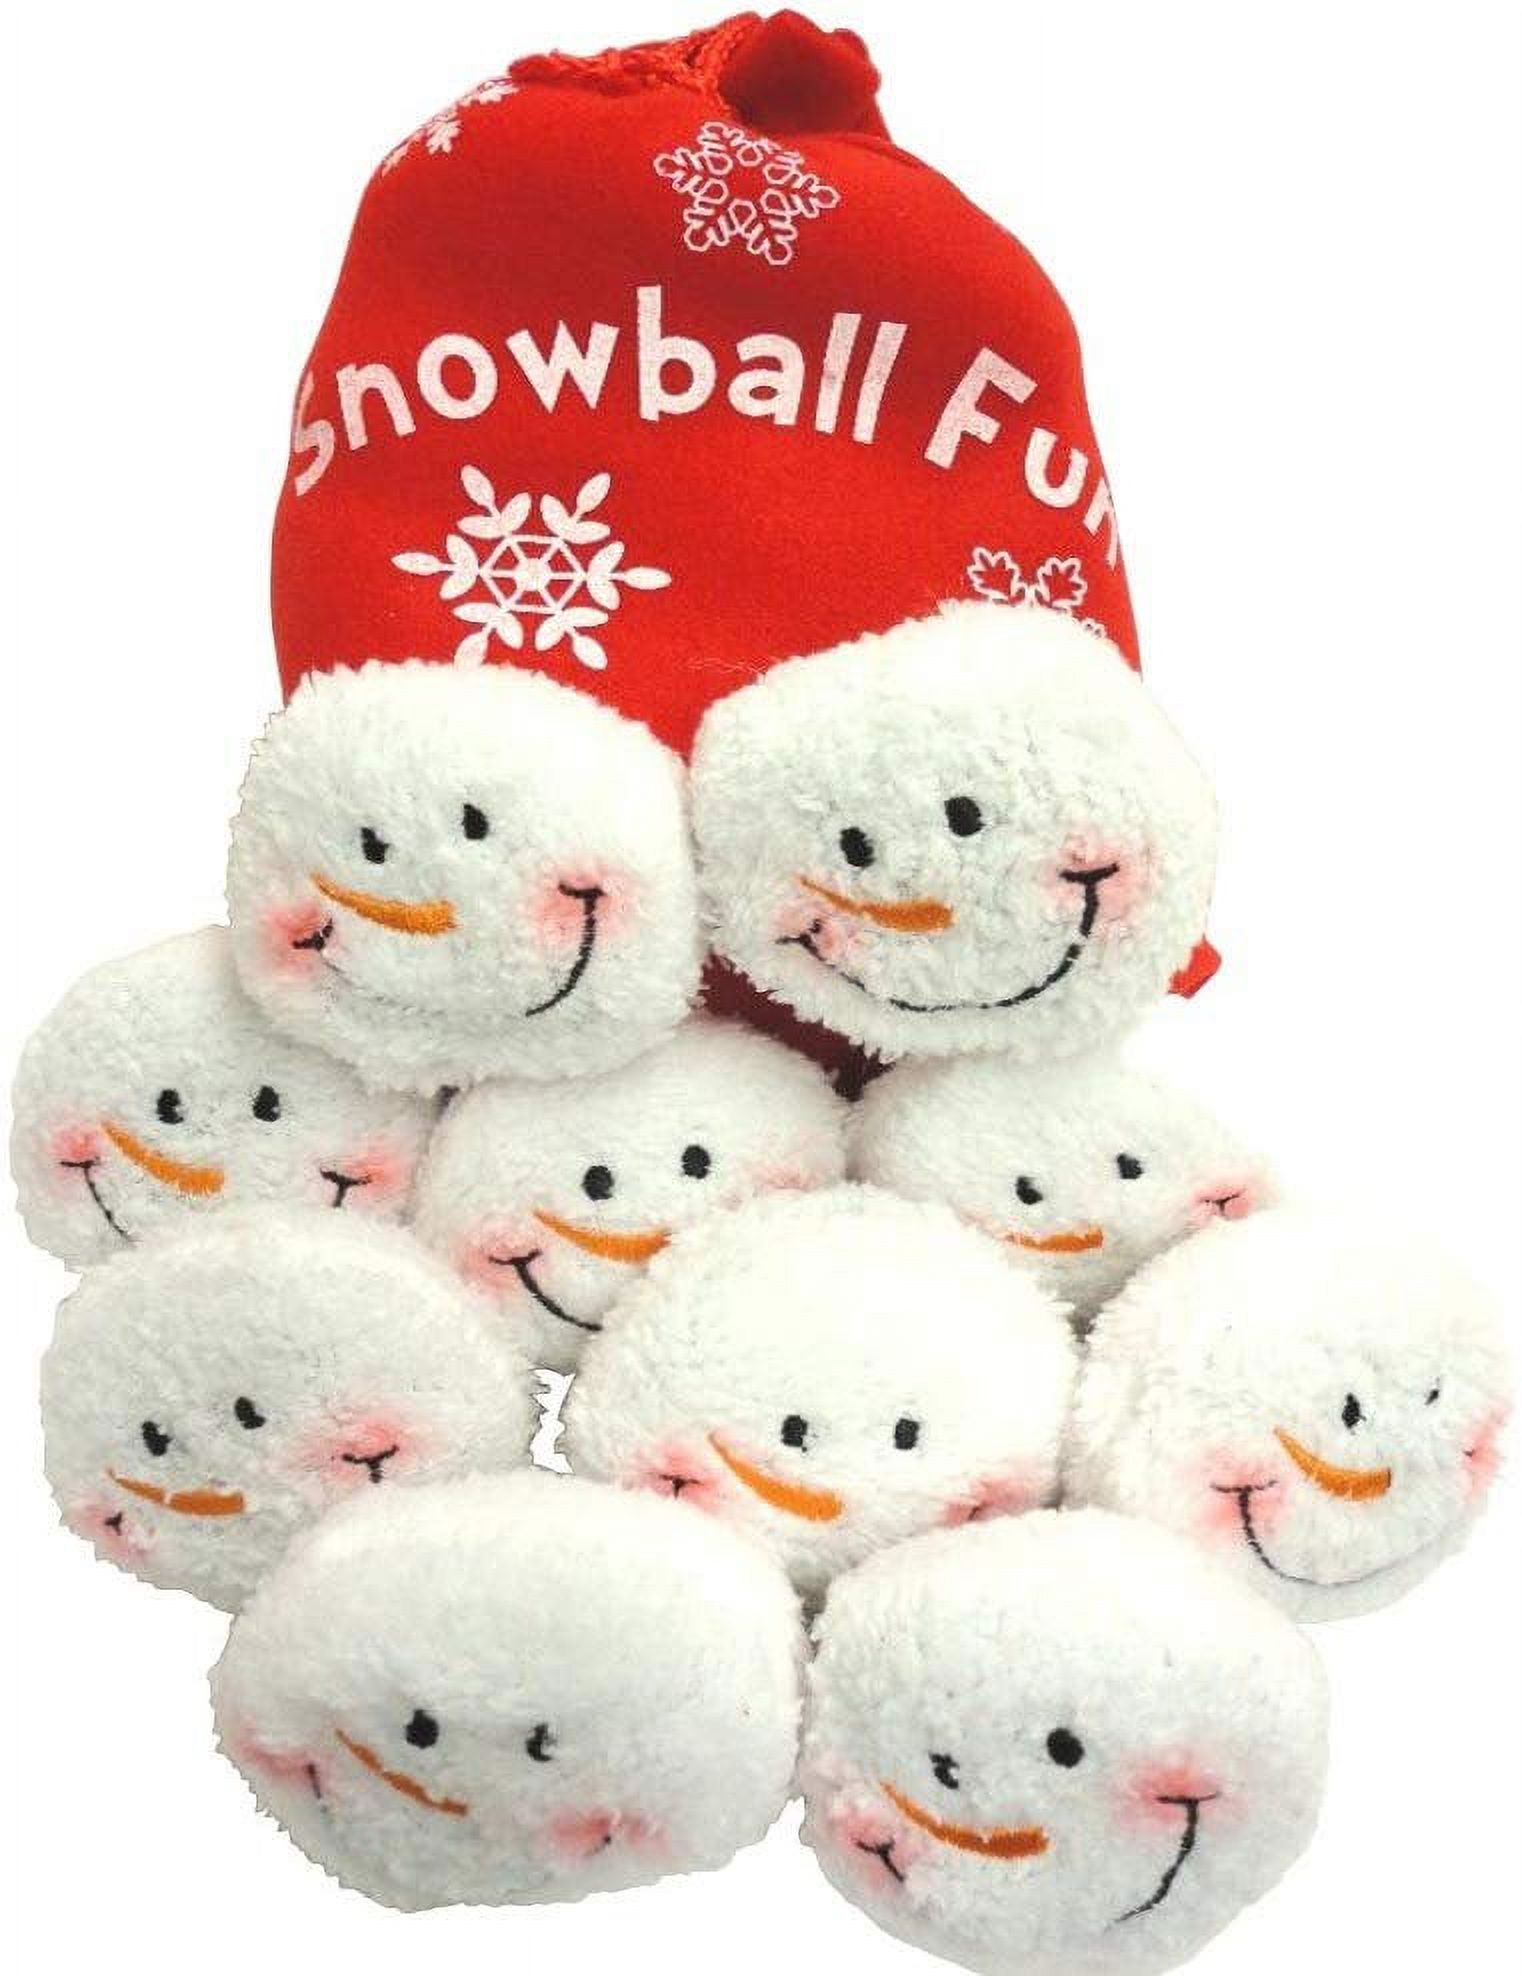 Dennis East Snowball Fight, 10 Plush Snowmen Balls in a Red Bag, Snowball Fun, Indoor Play - image 1 of 2